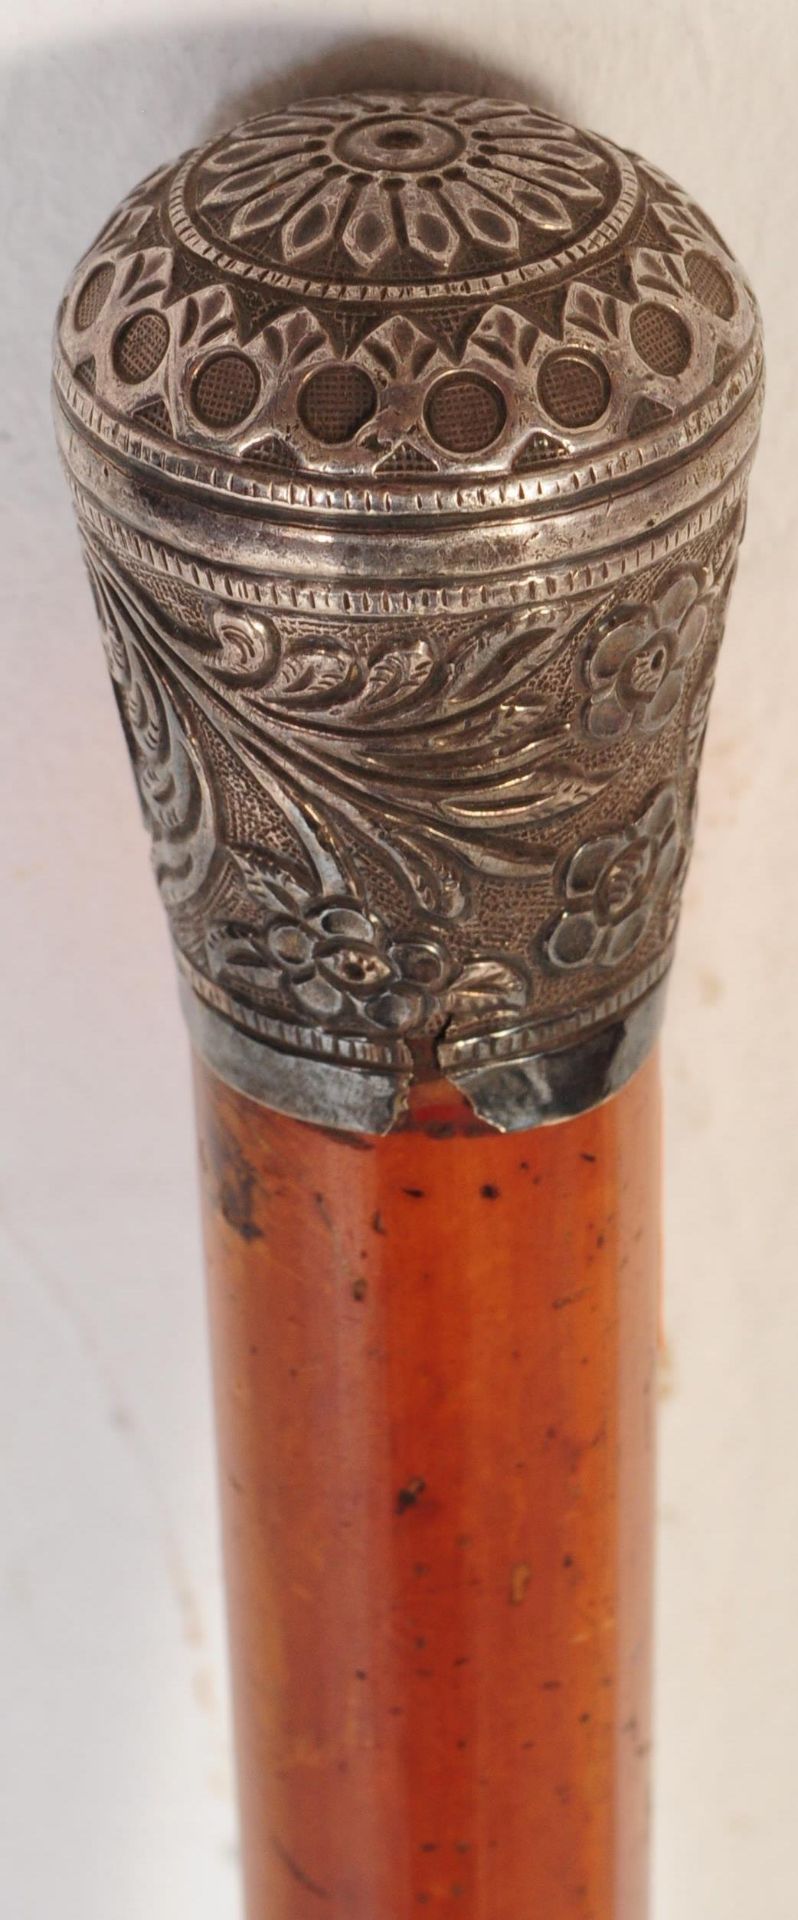 EARLY 20TH CENTURY SILVER TOP WOODEN WALKING STICK CANE - Image 4 of 5